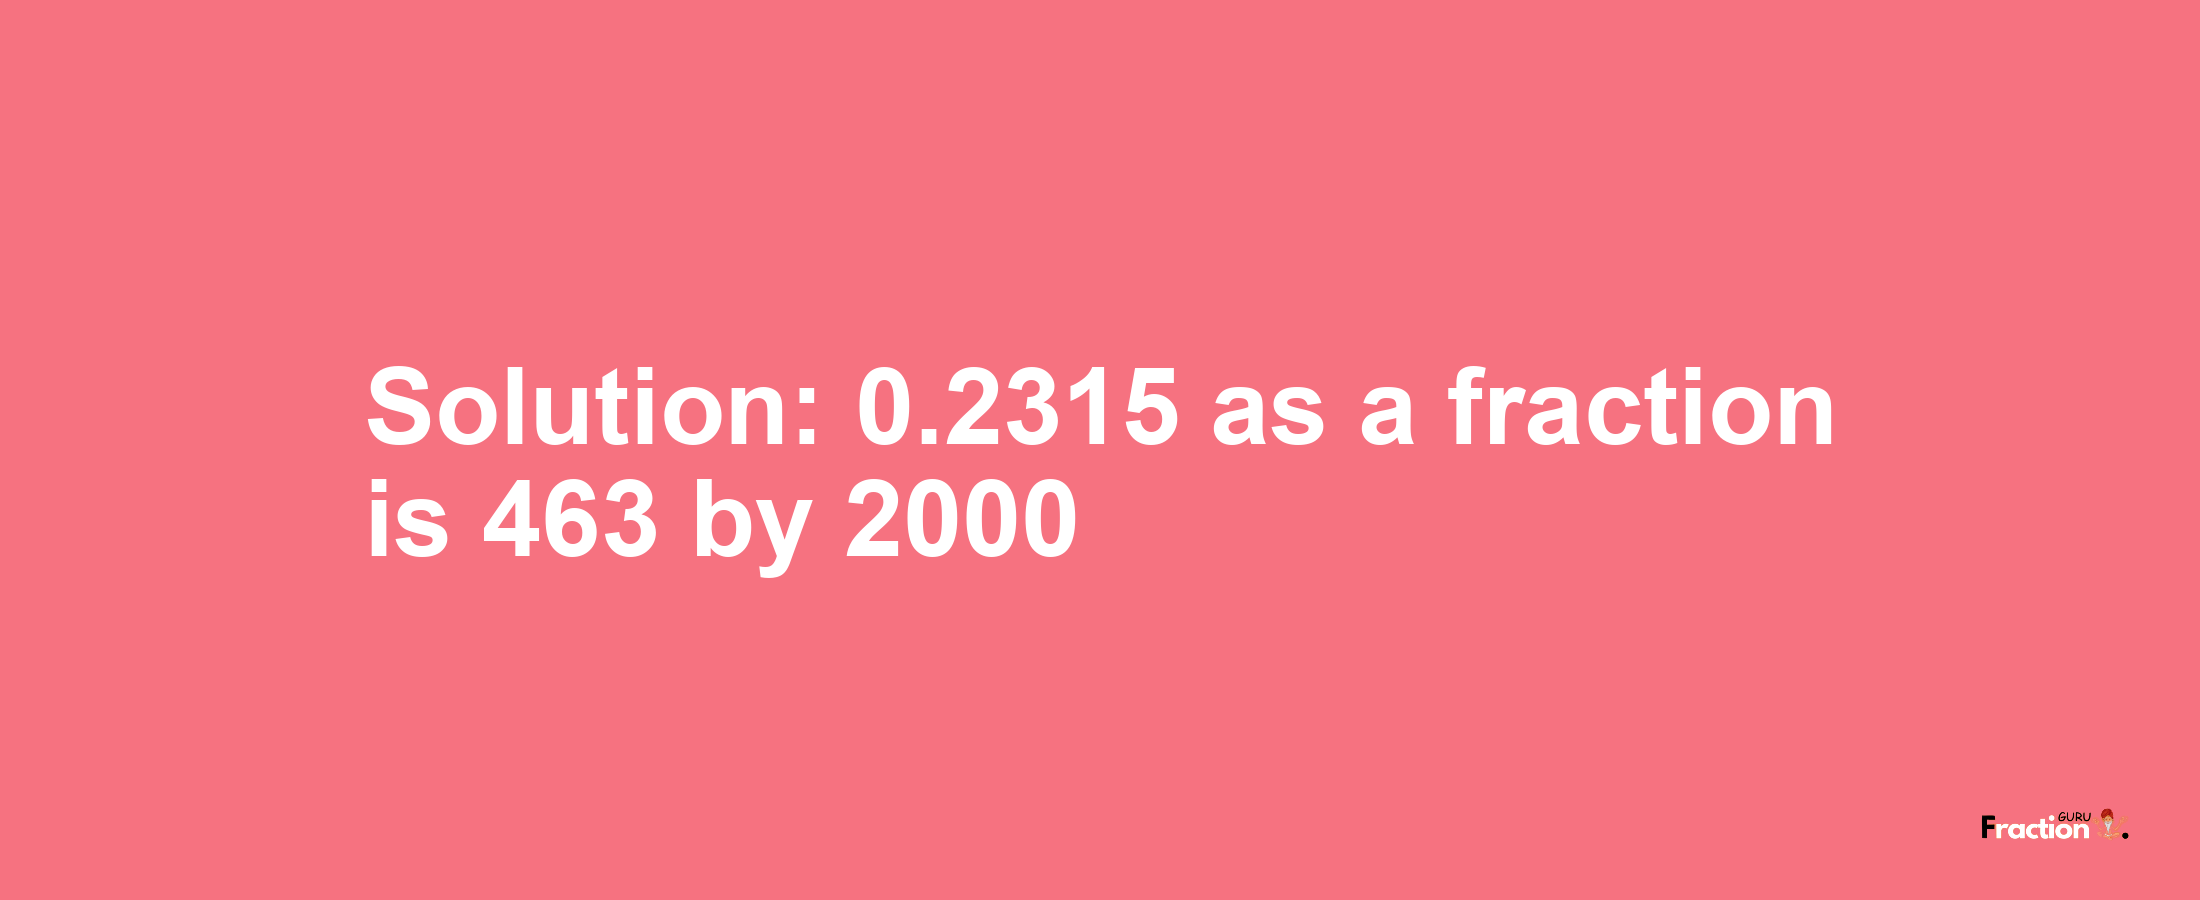 Solution:0.2315 as a fraction is 463/2000